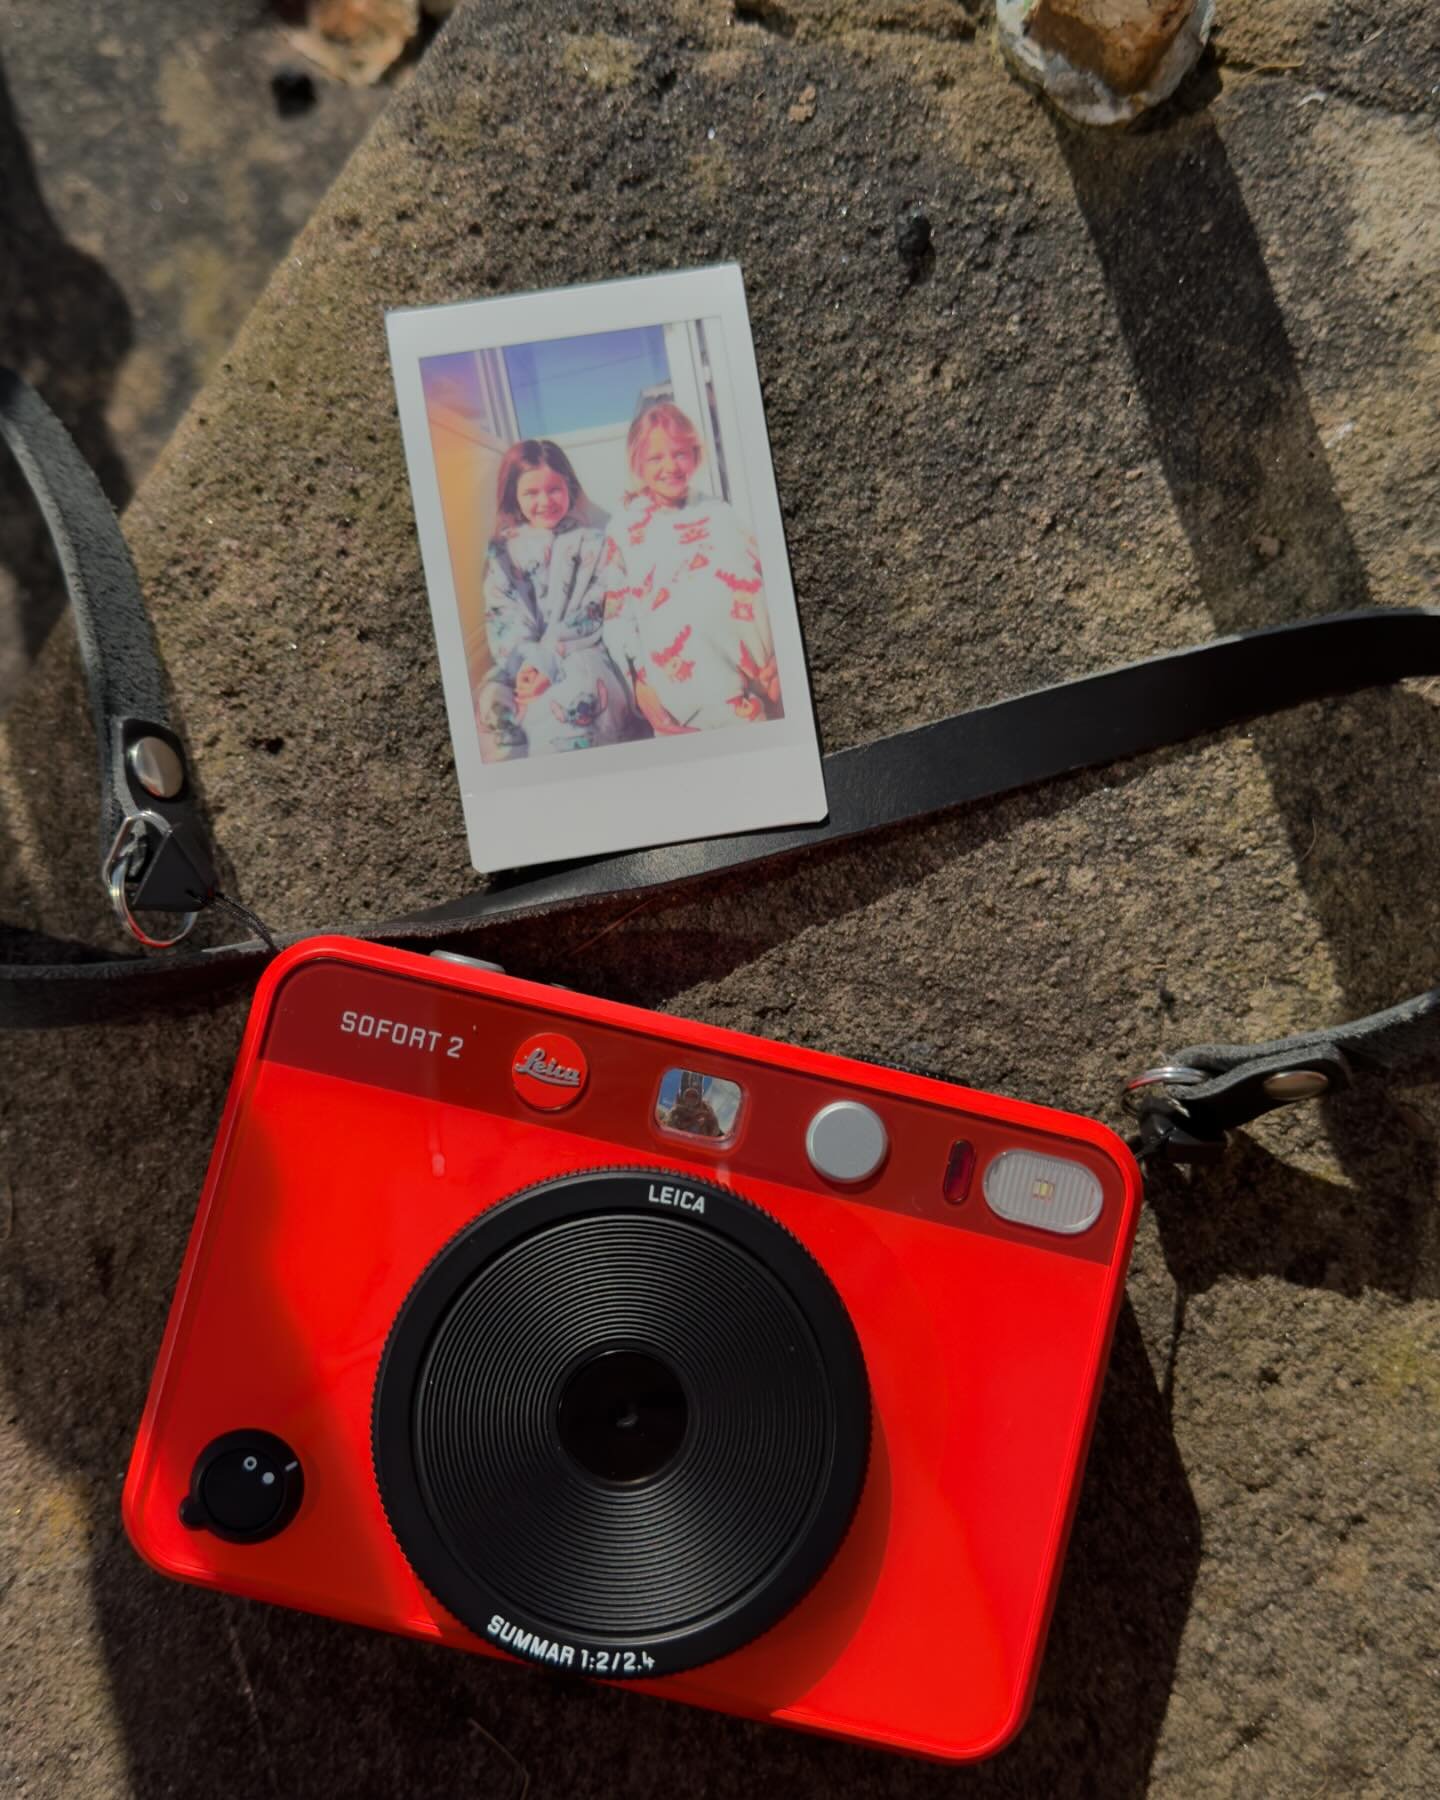 A rare Saturday off. 

Coffee and a wee photo in the beautiful sunshine with my best pals. 

Love this little Sofort camera and the prints from it. Added the &lsquo;light leak&rsquo; effect in camera for extra sunshine ❤️

Added a cool @cleversupplyc